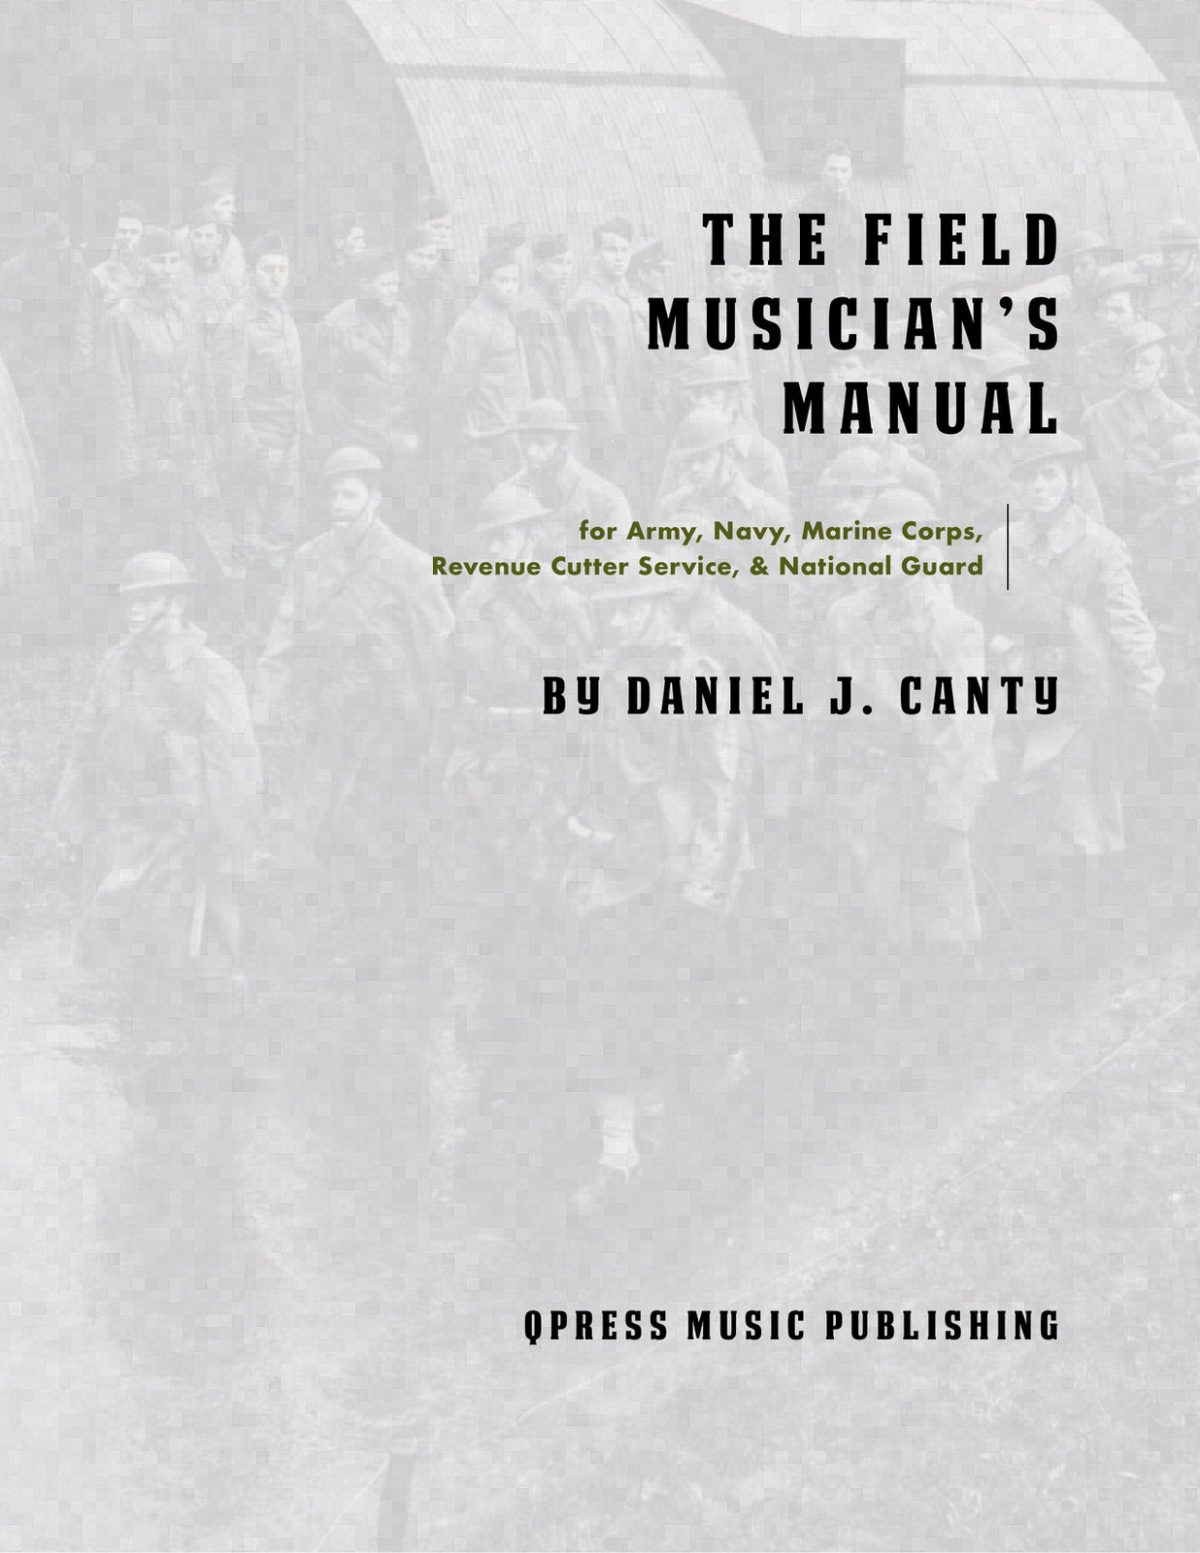 Field musicians manual cover